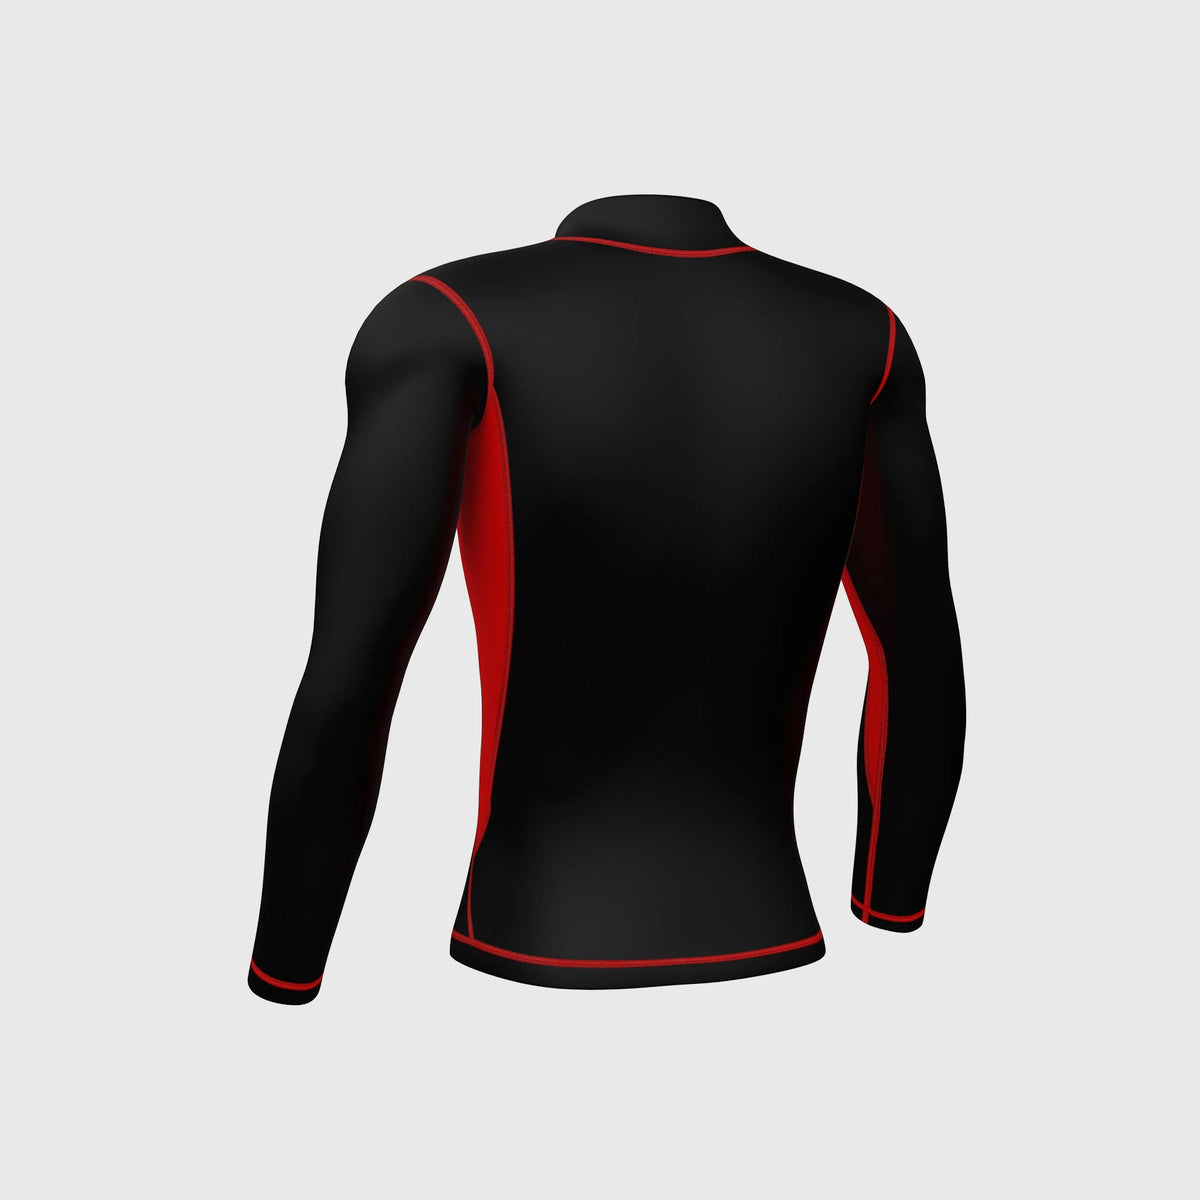 Fdx Inorex Men's Long Sleeve Thermal Winter Cycling Top Red